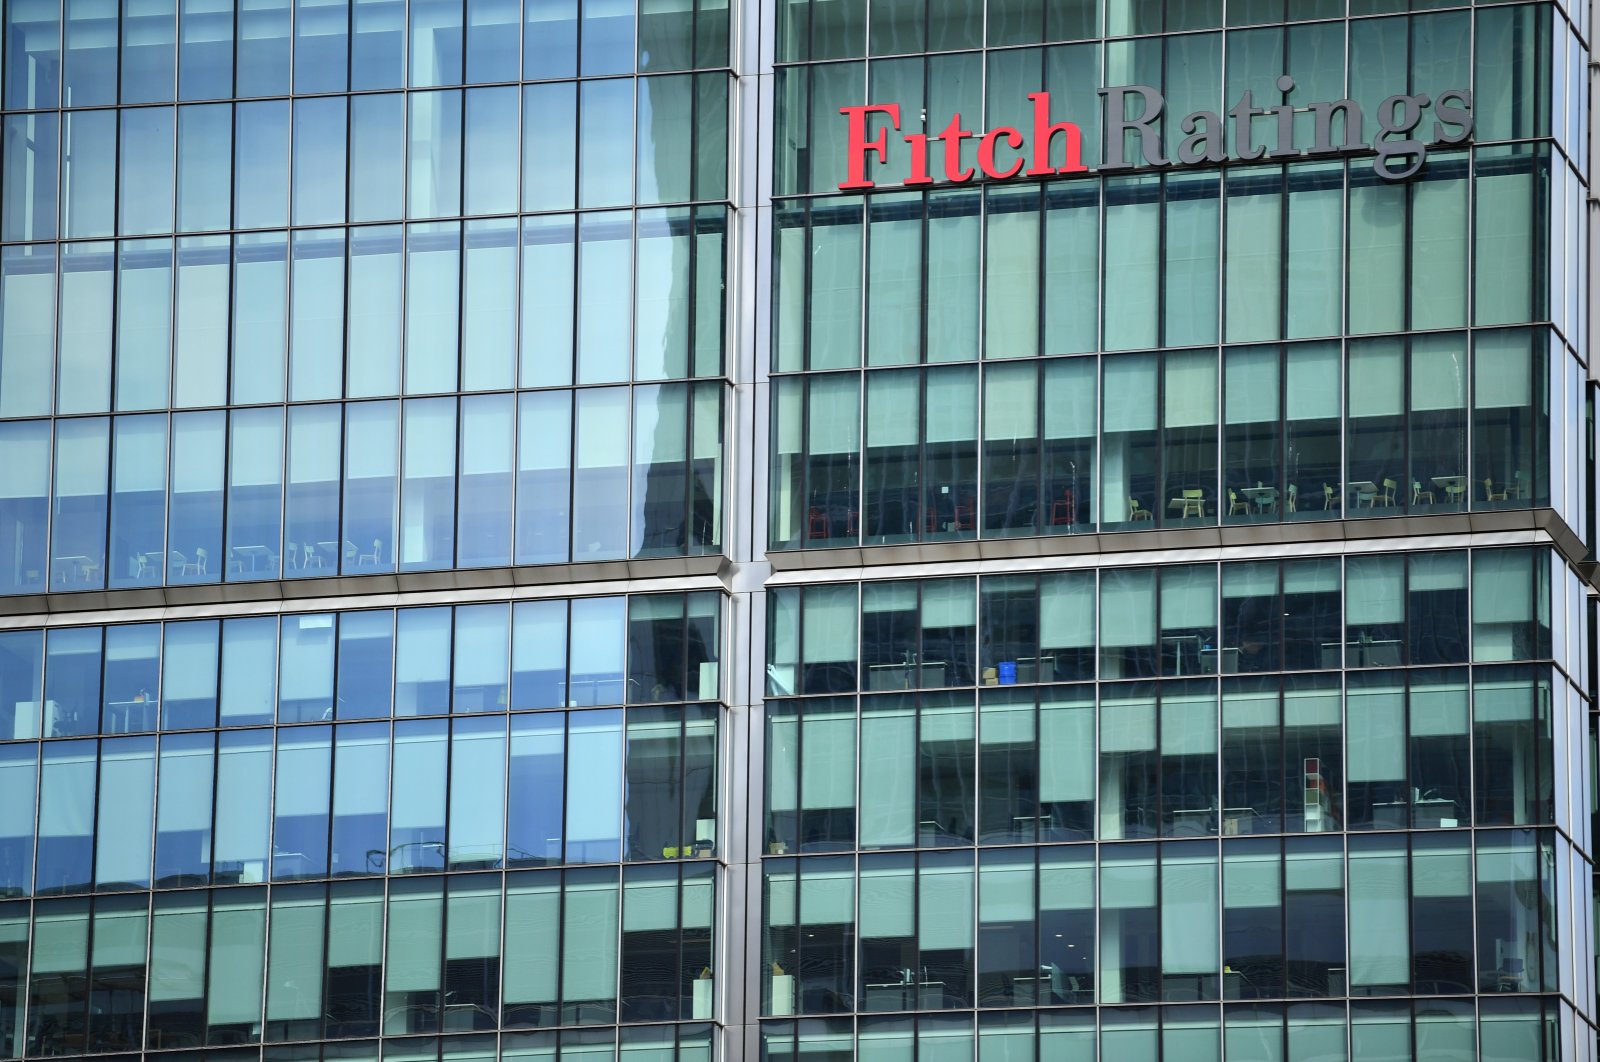 The offices of the Fitch Ratings building are seen in Canary Wharf, London, Britain, May 27, 2020. (Reuters Photo)